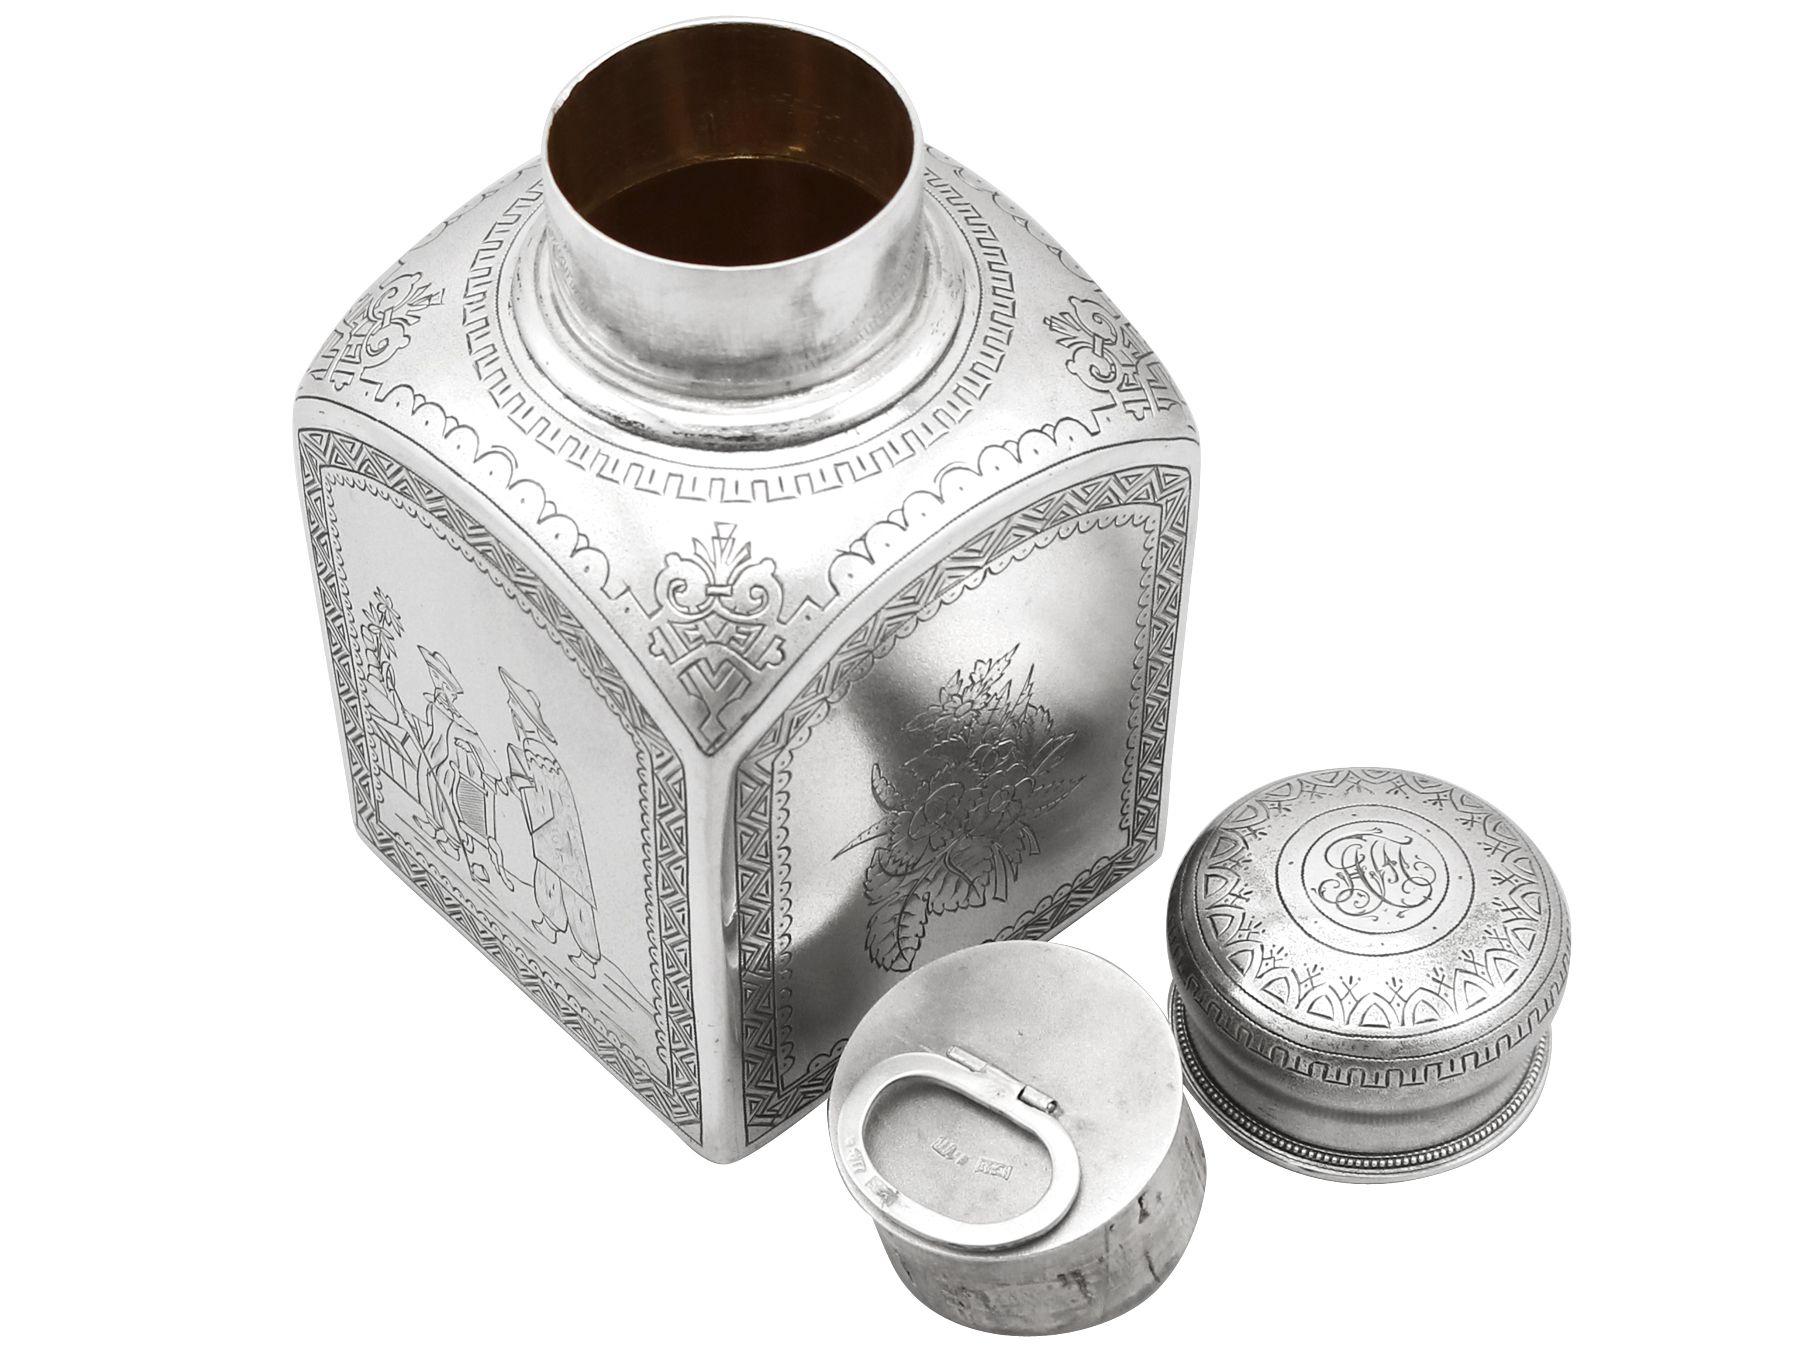 1890s Antique Russian Silver Tea Caddy In Excellent Condition For Sale In Jesmond, Newcastle Upon Tyne